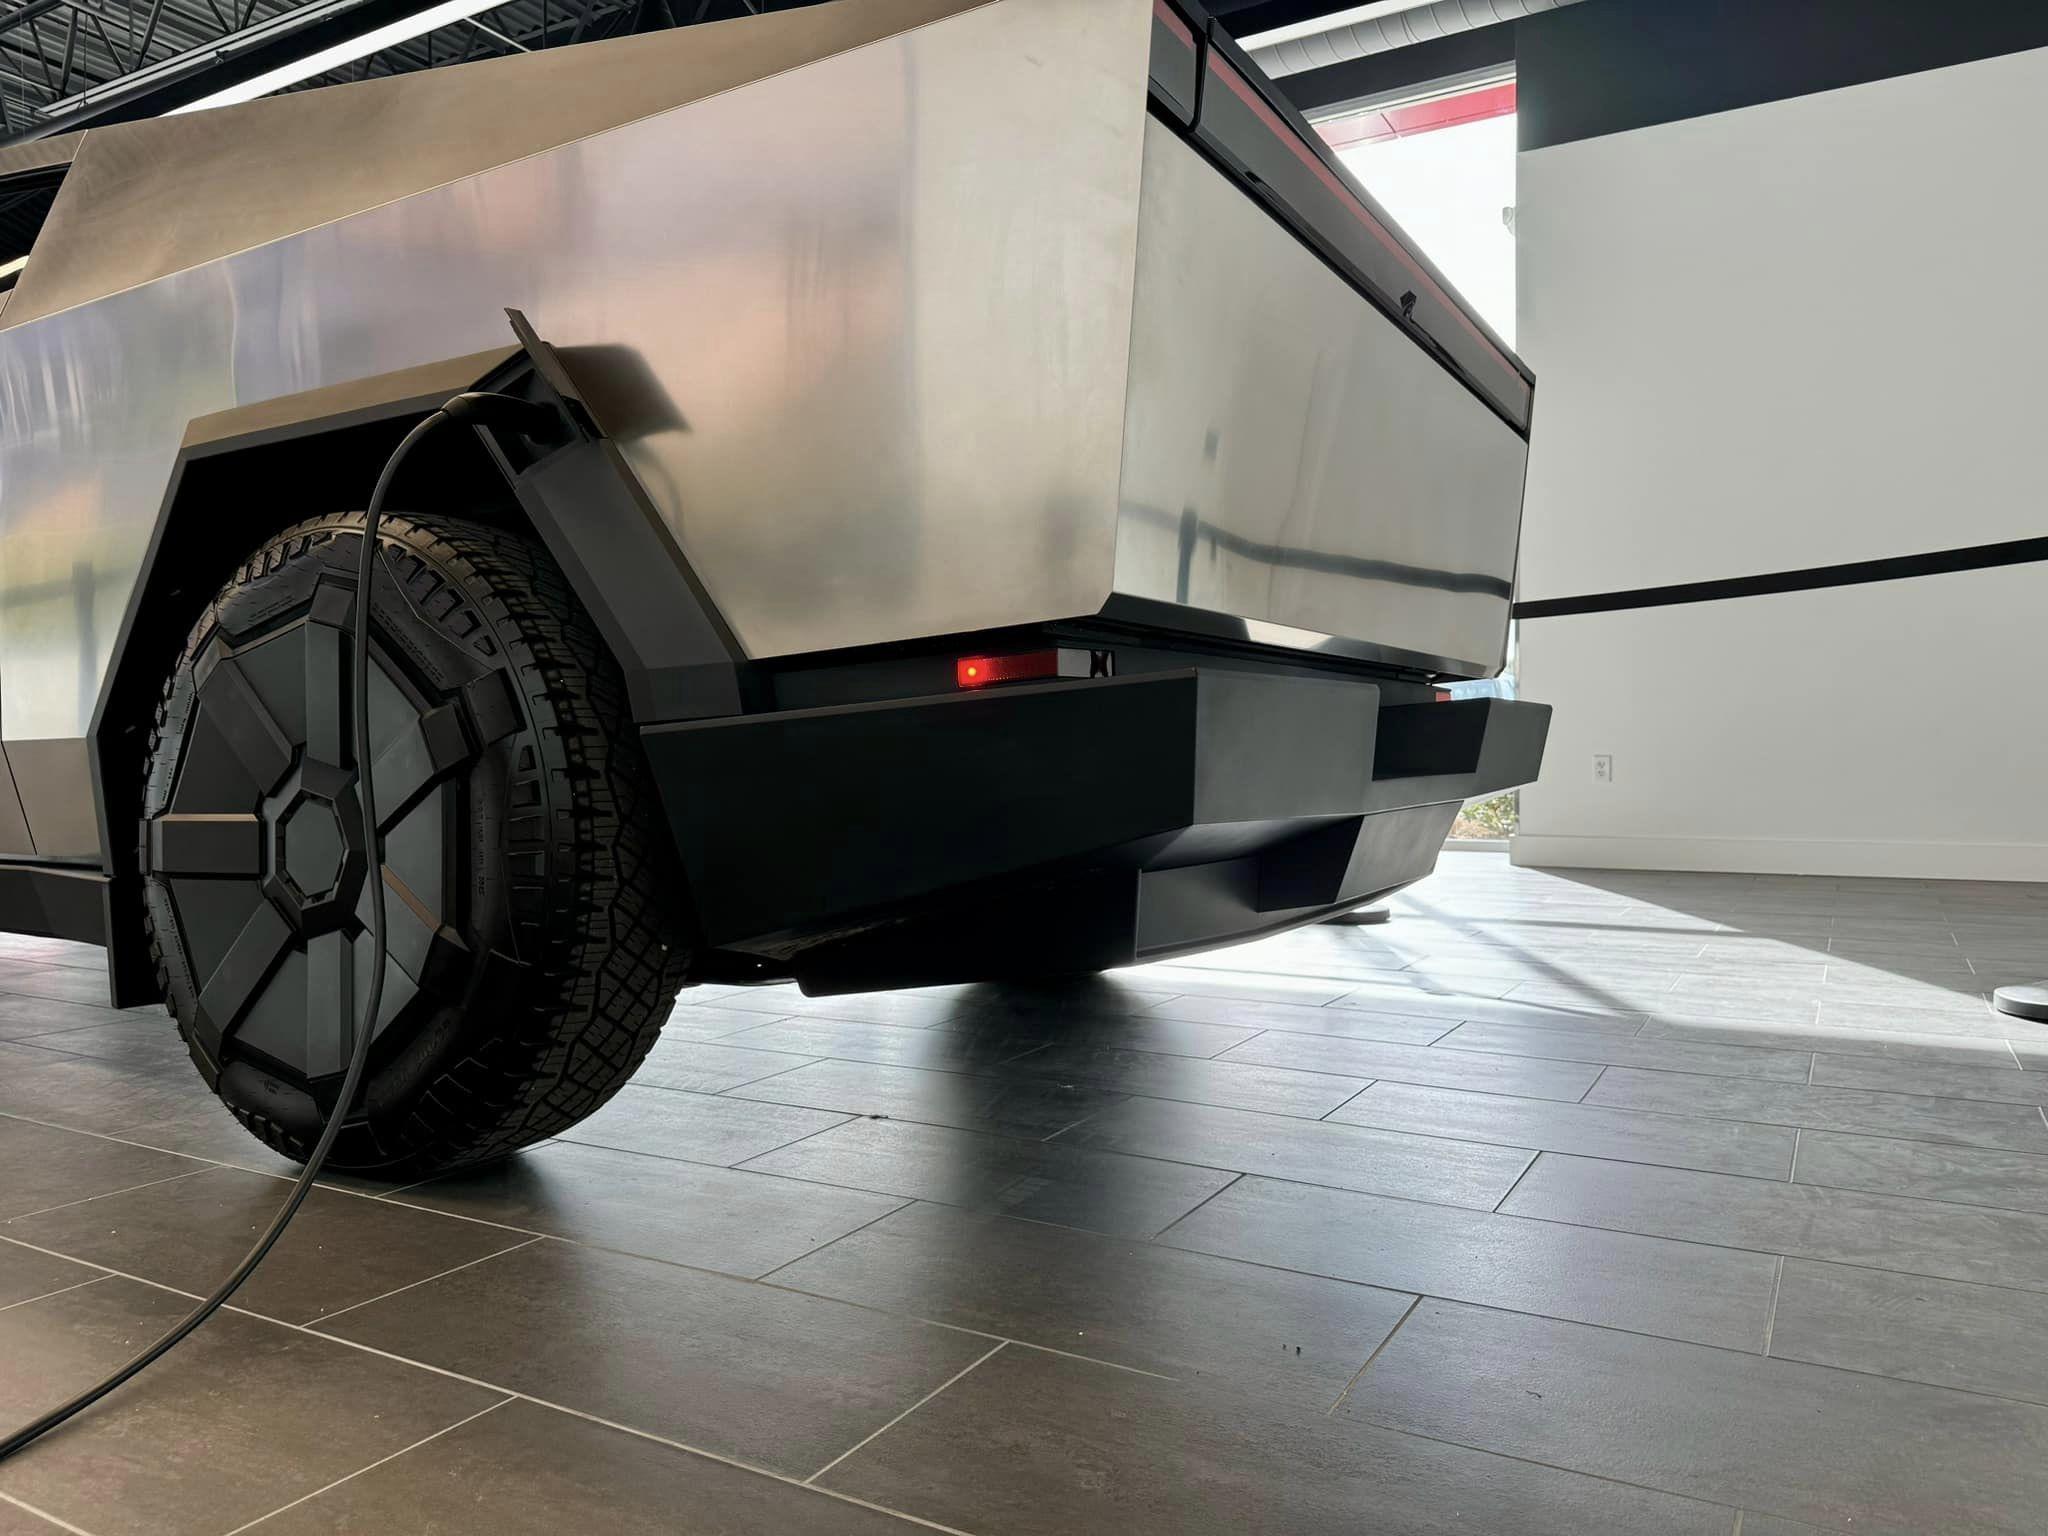 Tesla Cybertruck A Cybertruck appears at just-opened Clermont Florida Tesla Store / Service Center! 676526_10230402821270356_7399004774118498081_n-